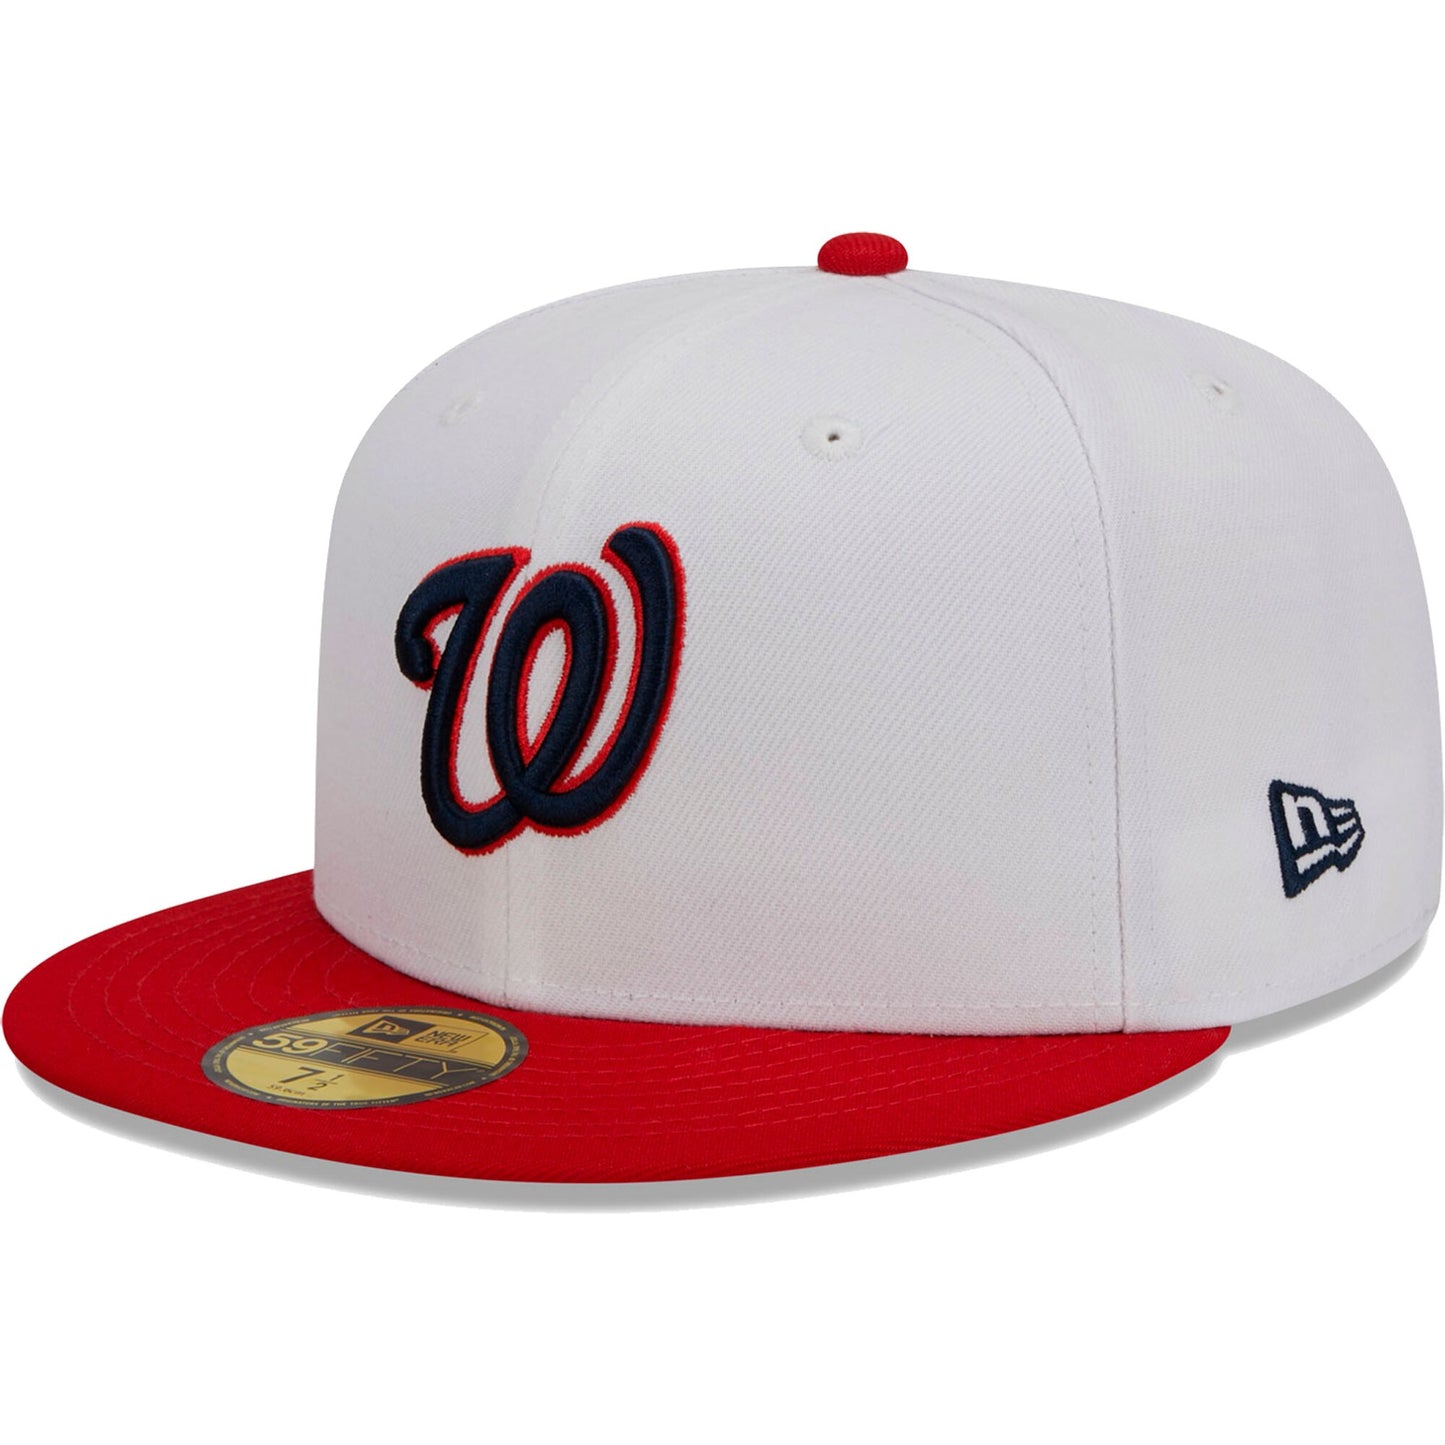 Washington Nationals New Era Optic 59FIFTY Fitted Hat - White/Red